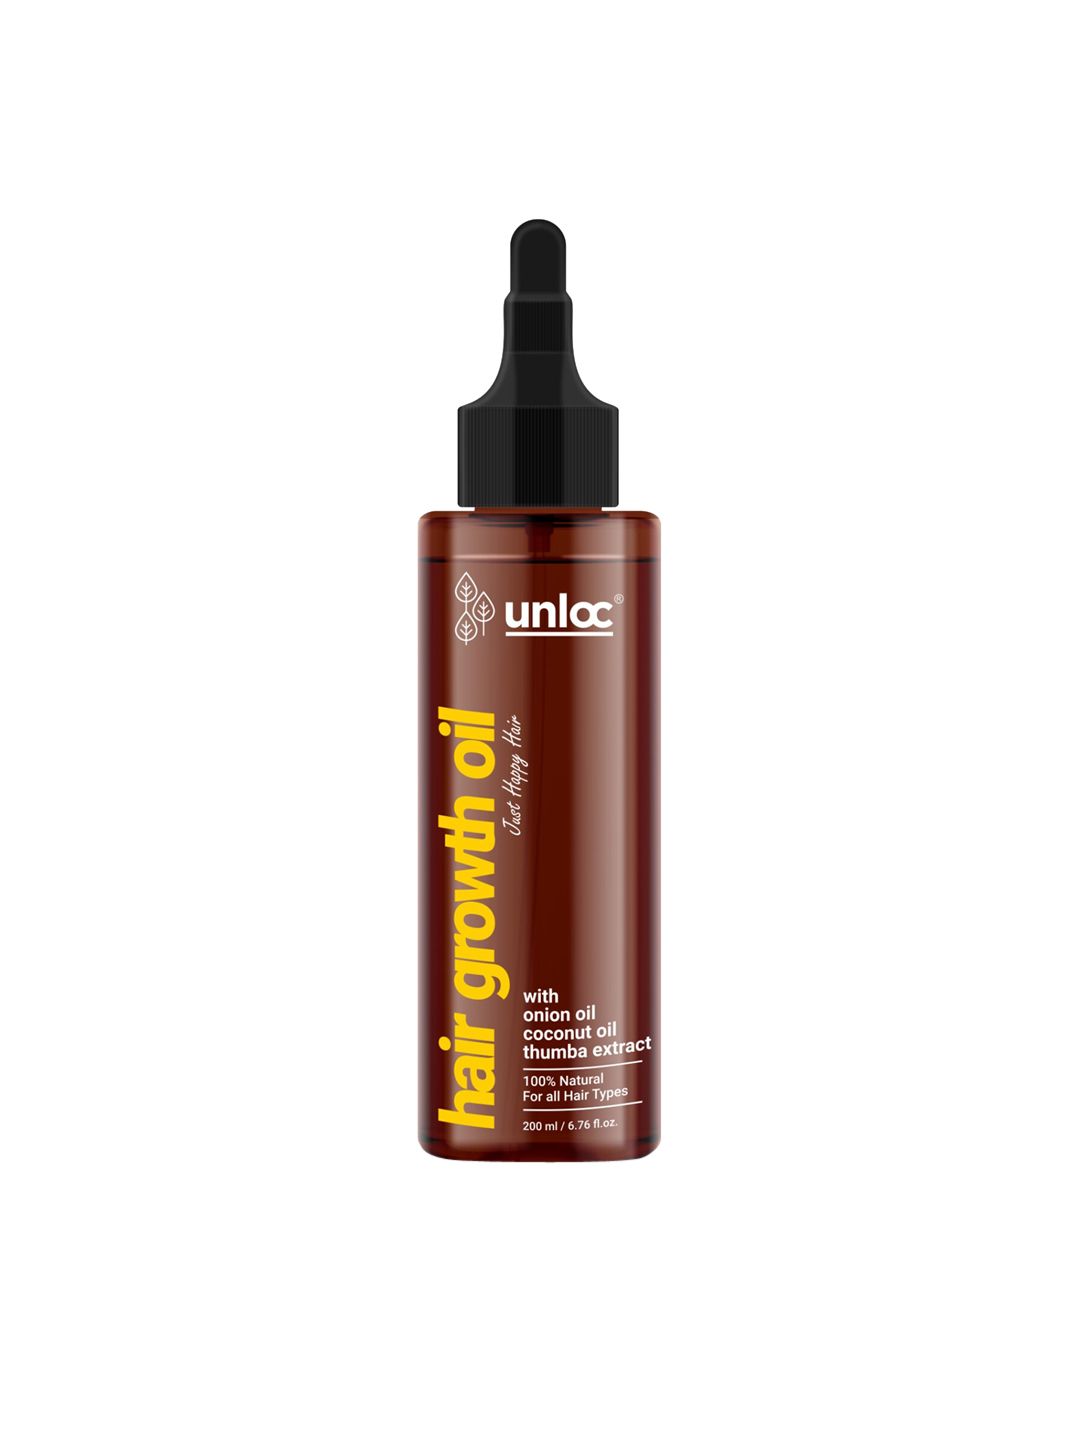 Unloc Mixify 20 Super Ingredients Hair Growth Oil 200 ml Price in India